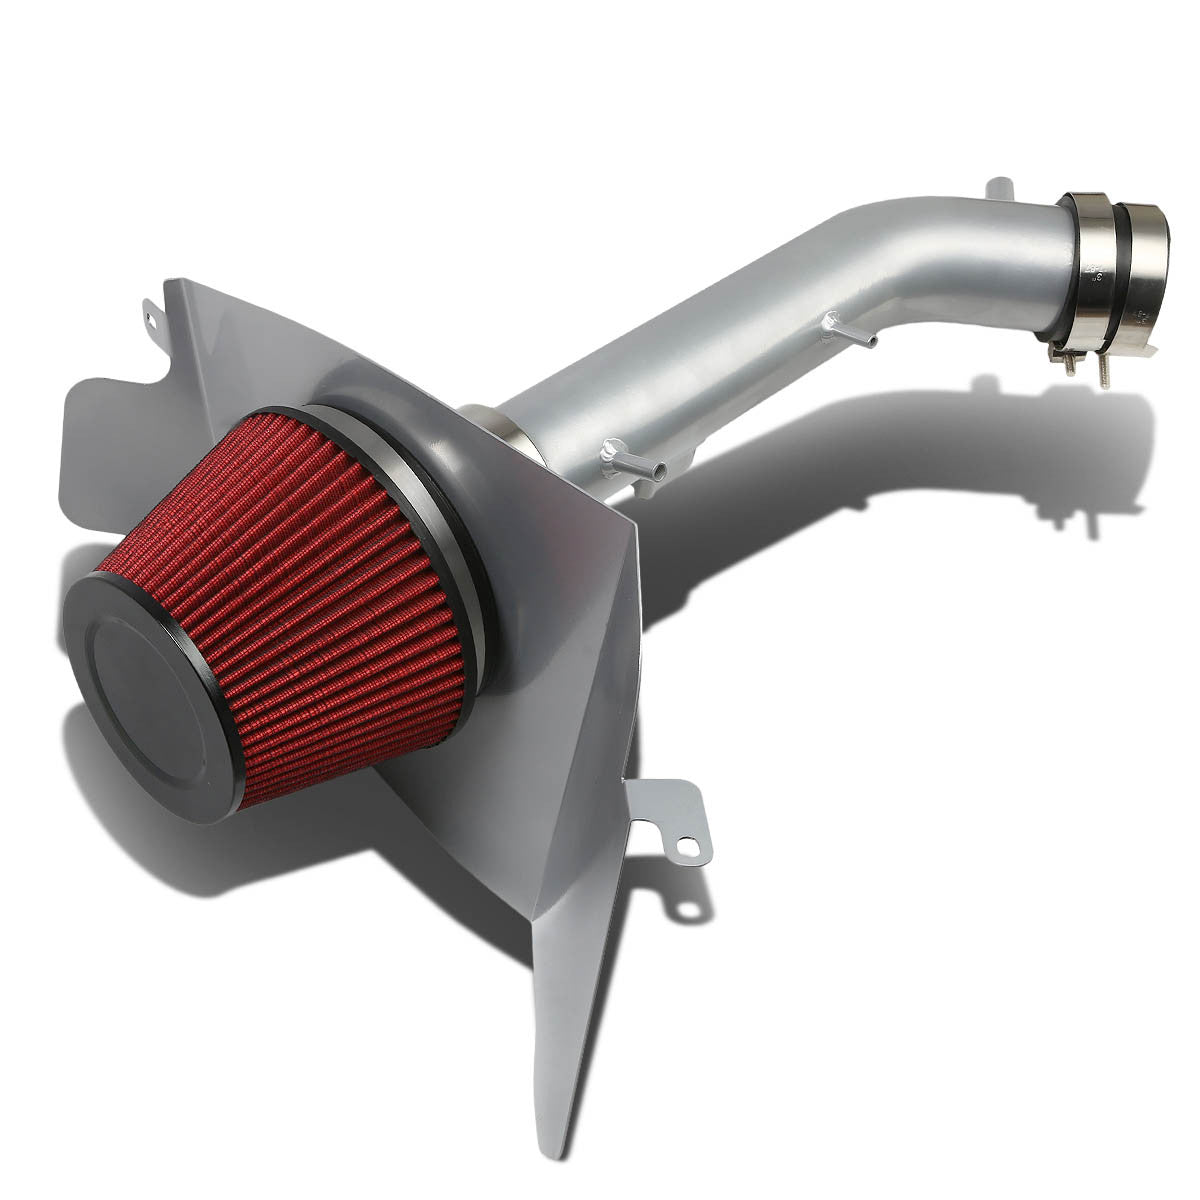 99-04 Toyota Tacoma 4Runner 3.4L V6 Aluminum Cold Air Intake w/Heat Shield+Cone Filter